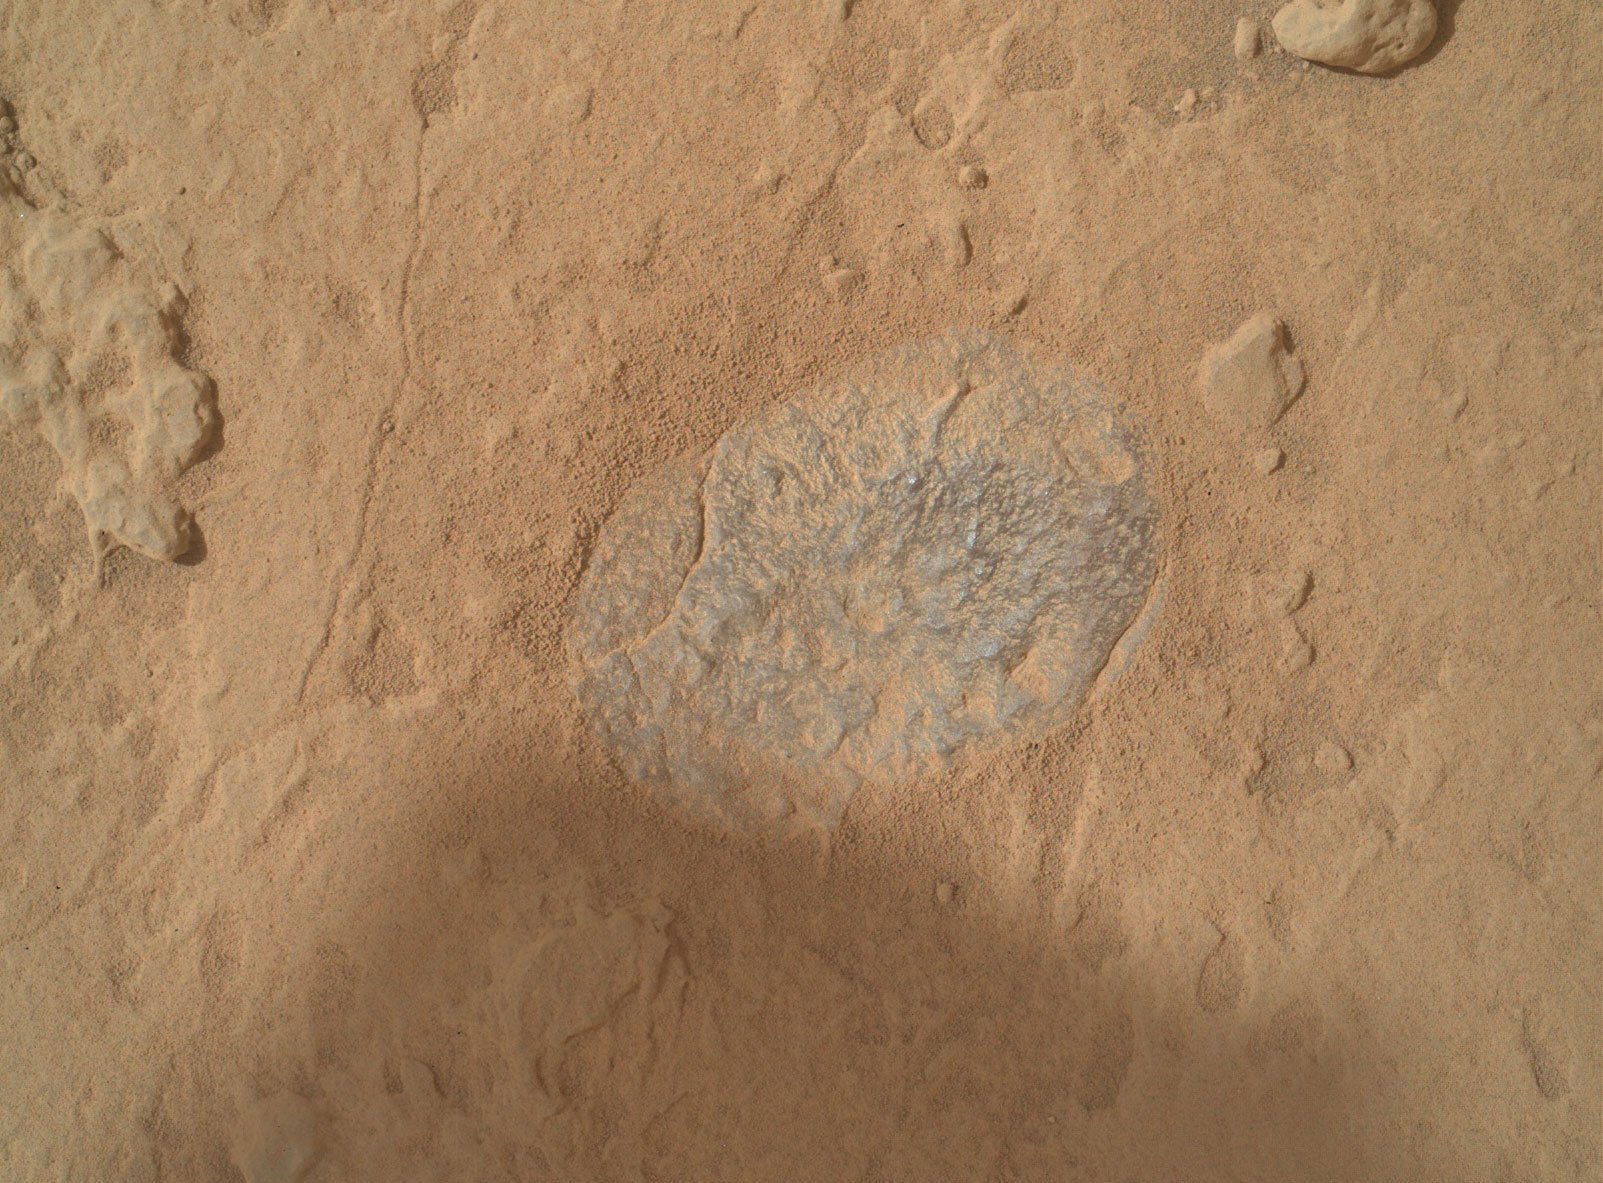 NASA's Mars rover Curiosity acquired this image using its Mars Hand Lens Imager (MAHLI), located on the turret at the end of the rover's robotic arm, on December 7, 2022, Sol 3674.